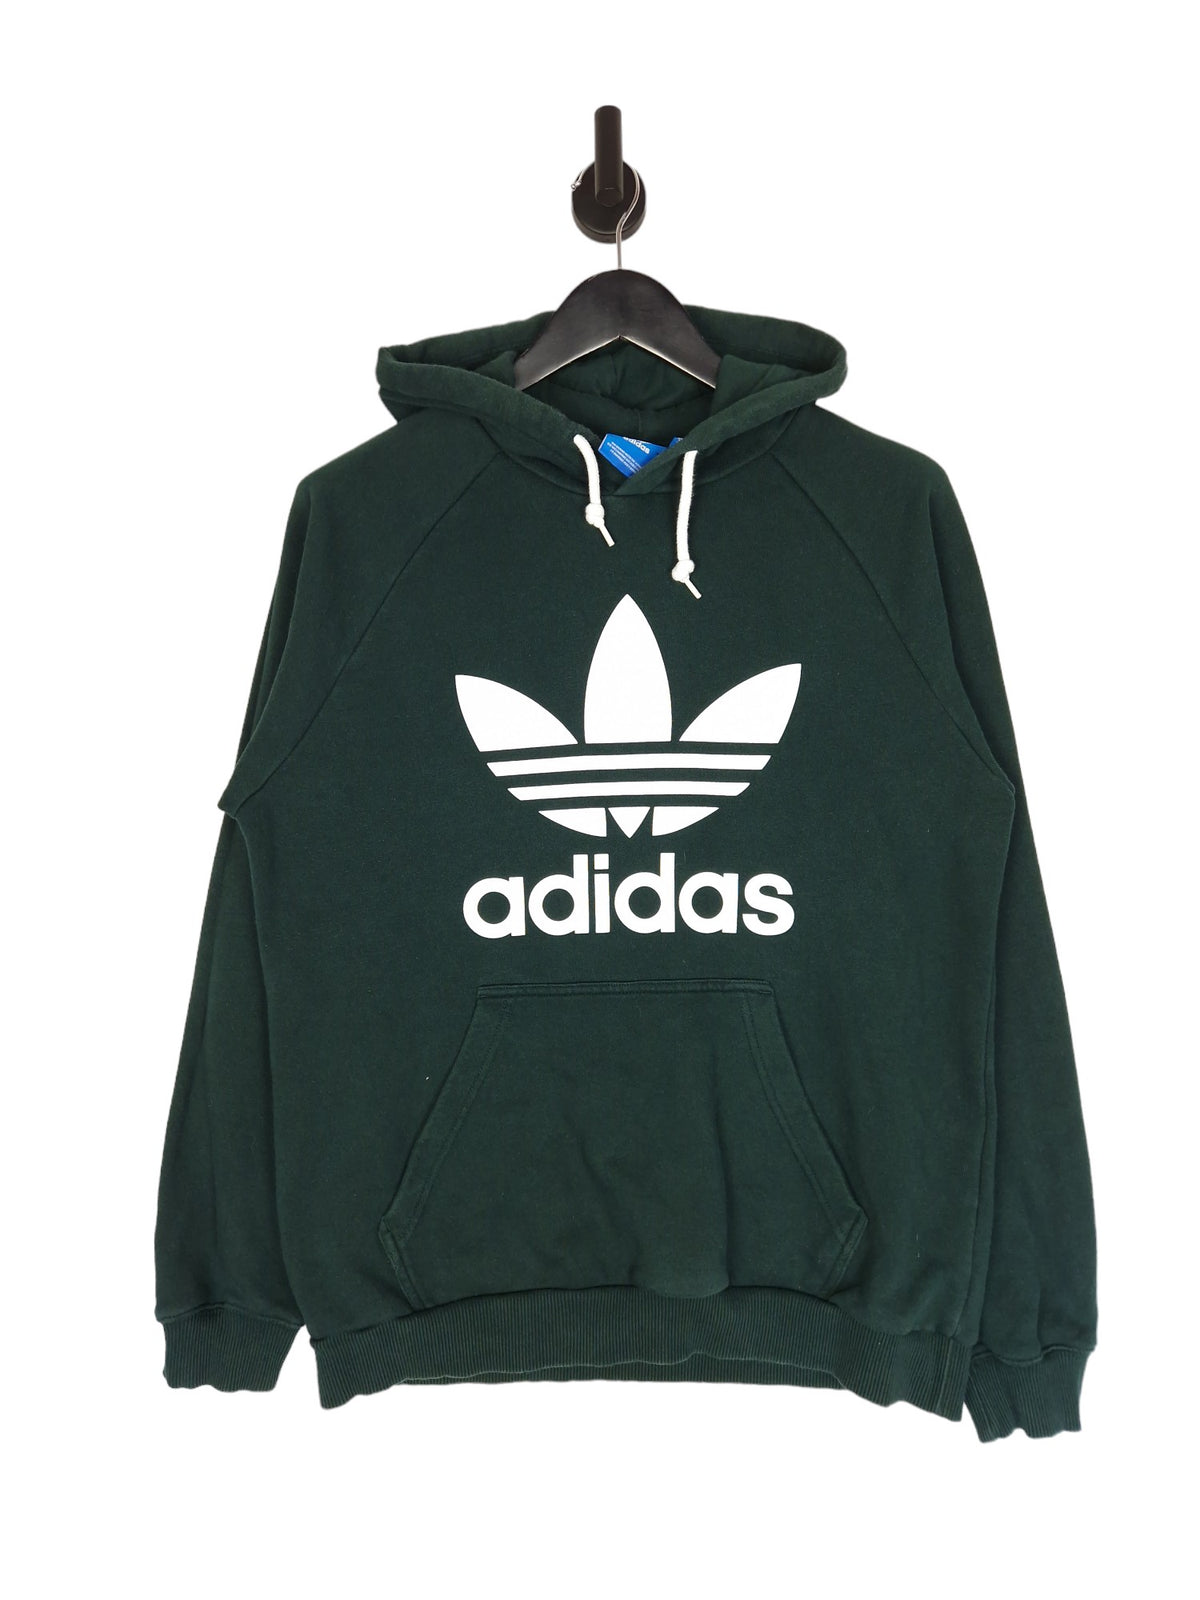 Adidas Spell Out Hoodie - Size Medium